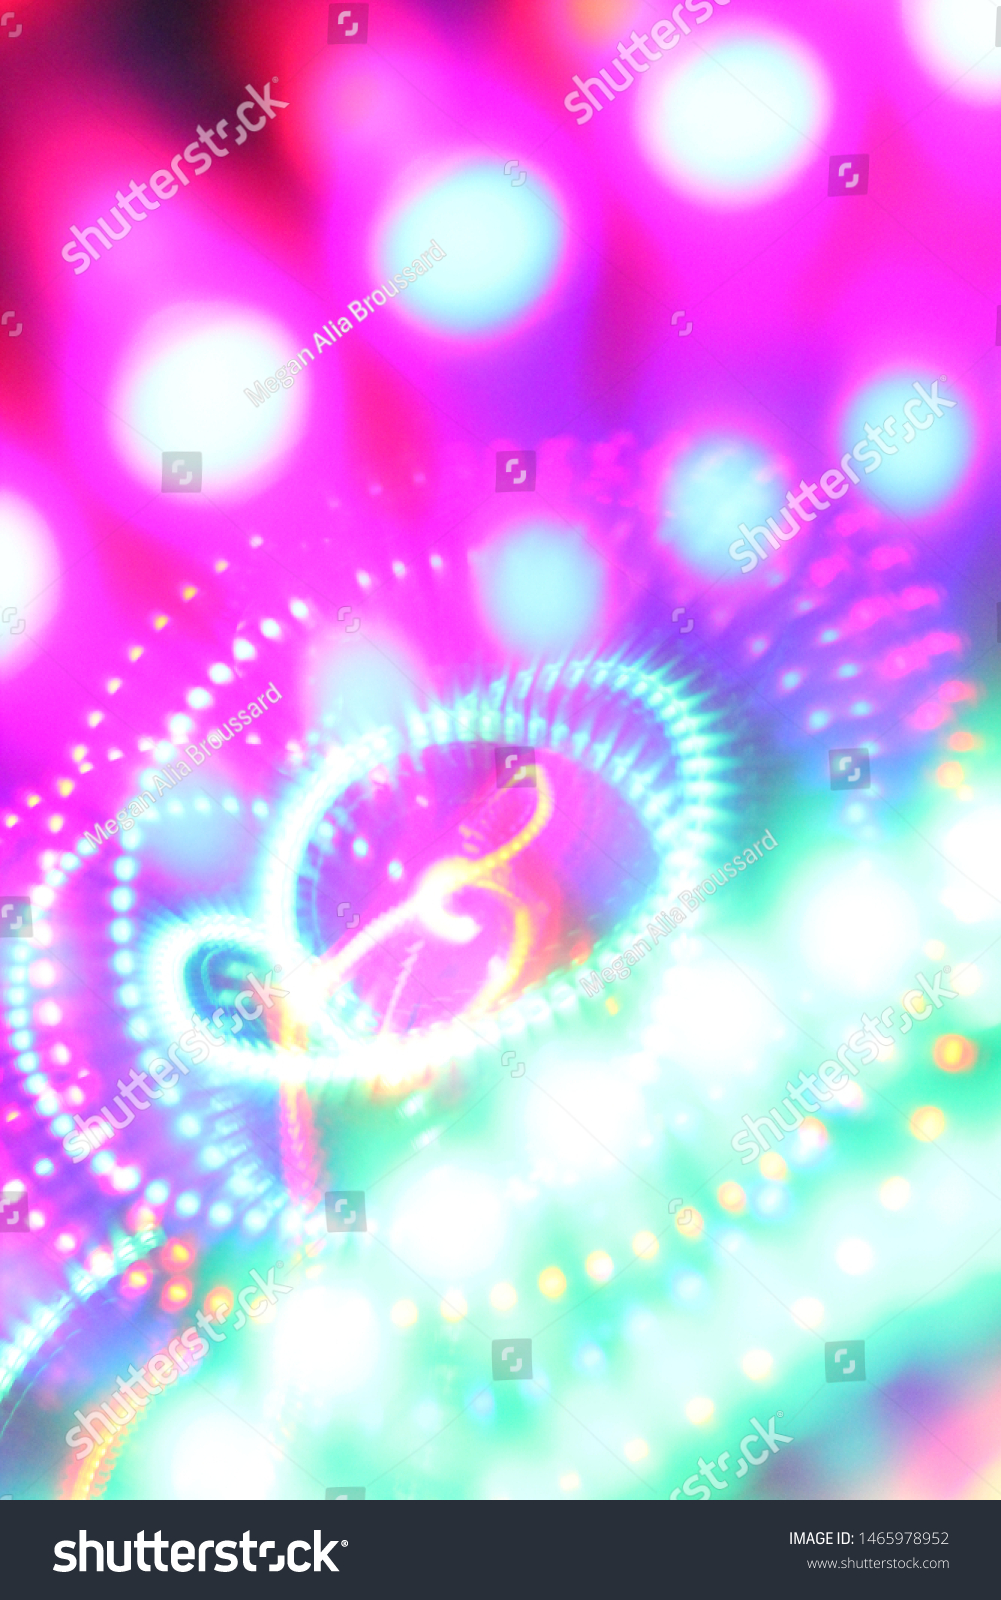 Led light blur abstract colorful rainbow background. Music symbol treble clef drawn using light in middle. #1465978952